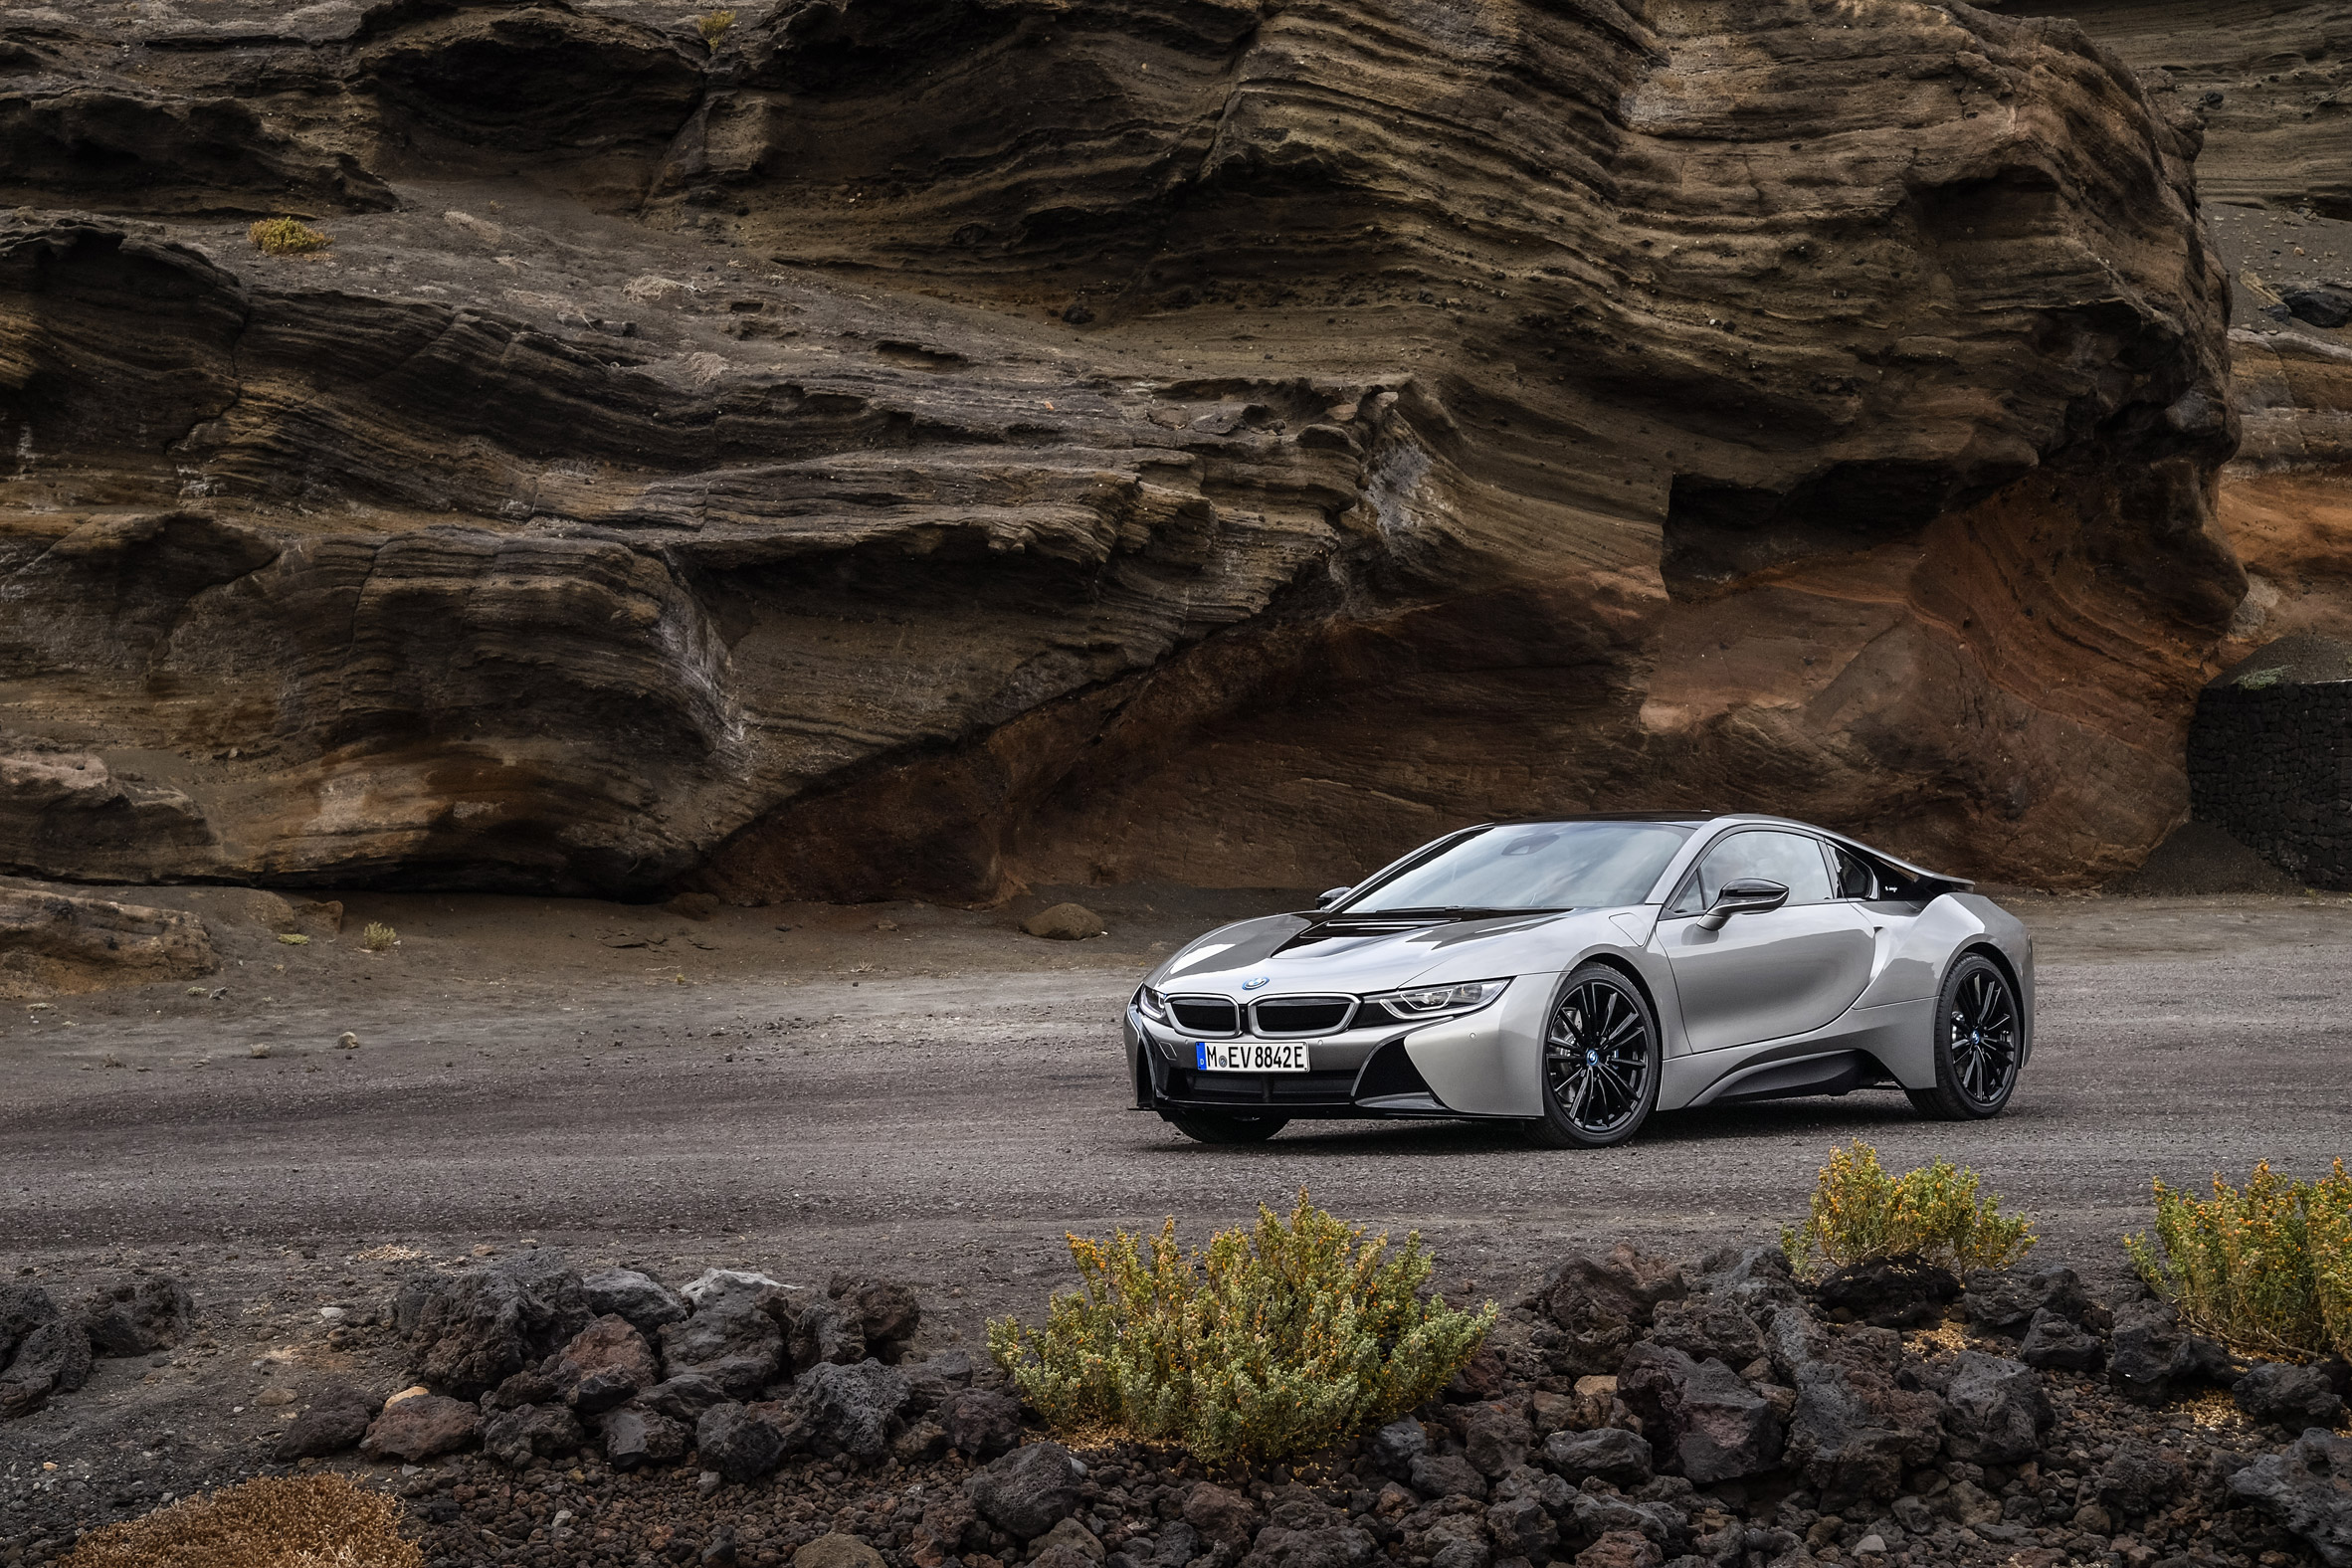 BMW Plots Sustainable Supercar With the i8 Project - WSJ